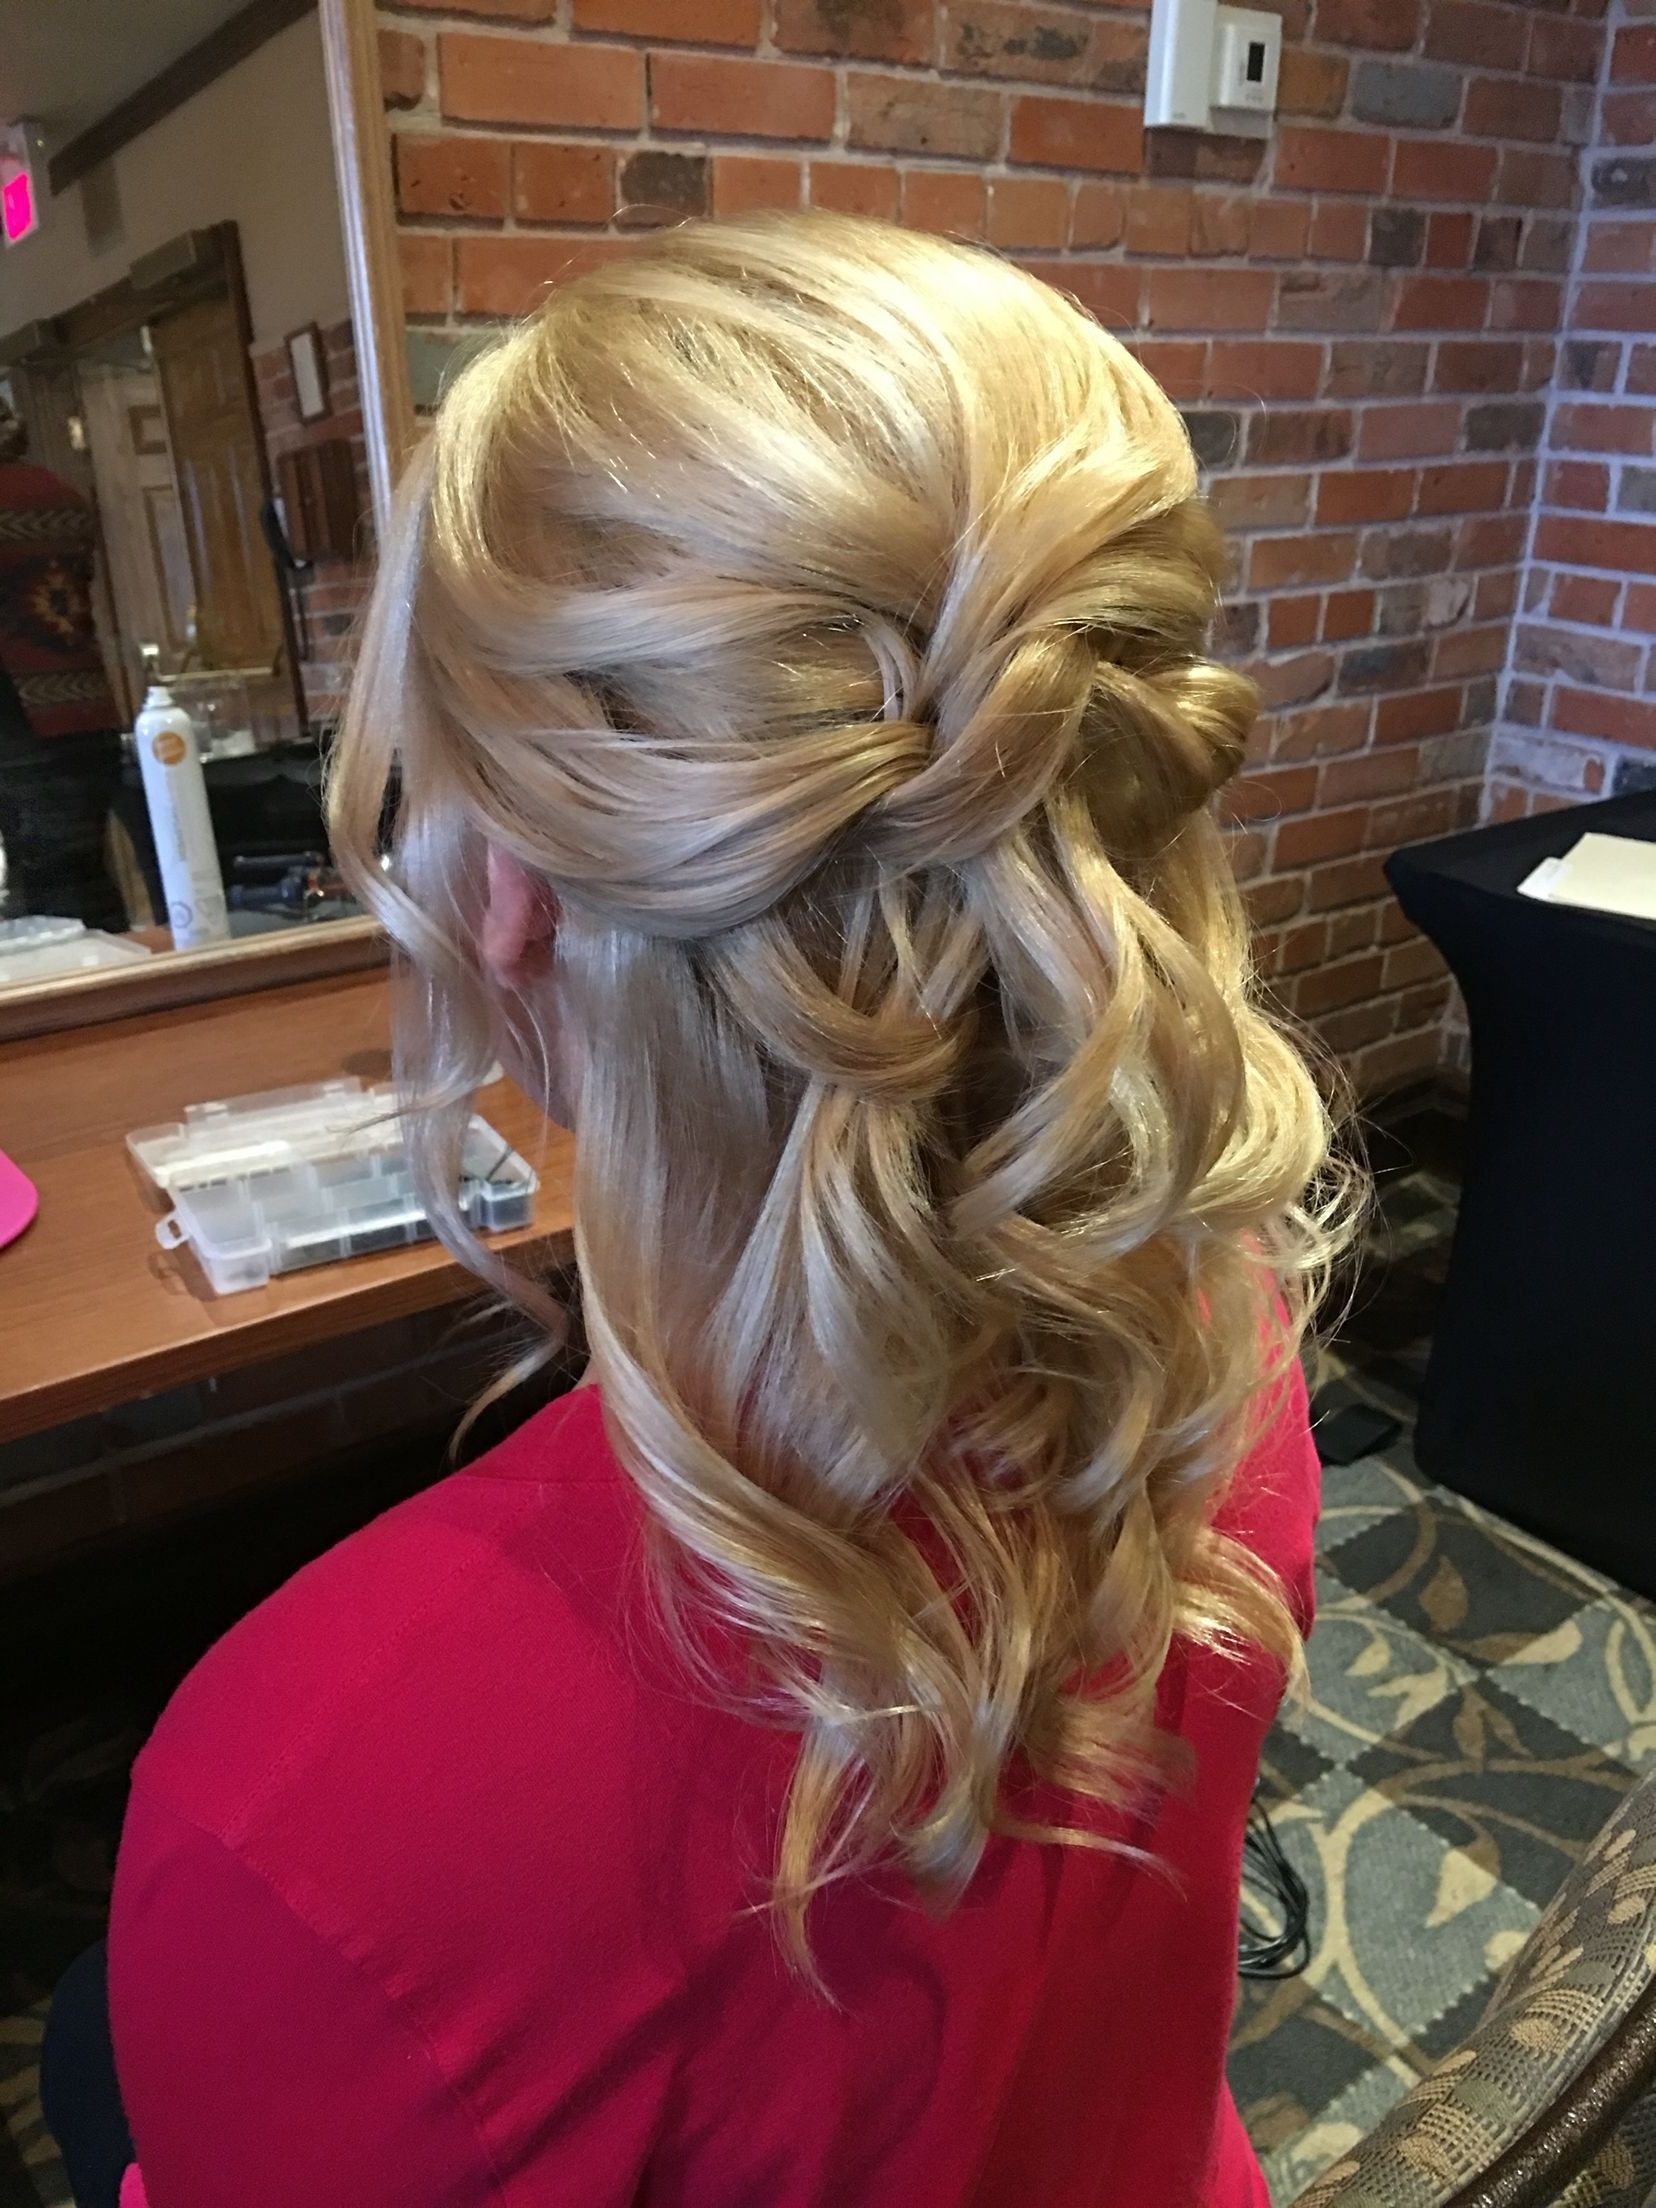 Half Up Half Down Wedding Hair For Bride Or Mother Of The Bride Inside Mother Of The Bride Half Updo Hairstyles (View 1 of 15)